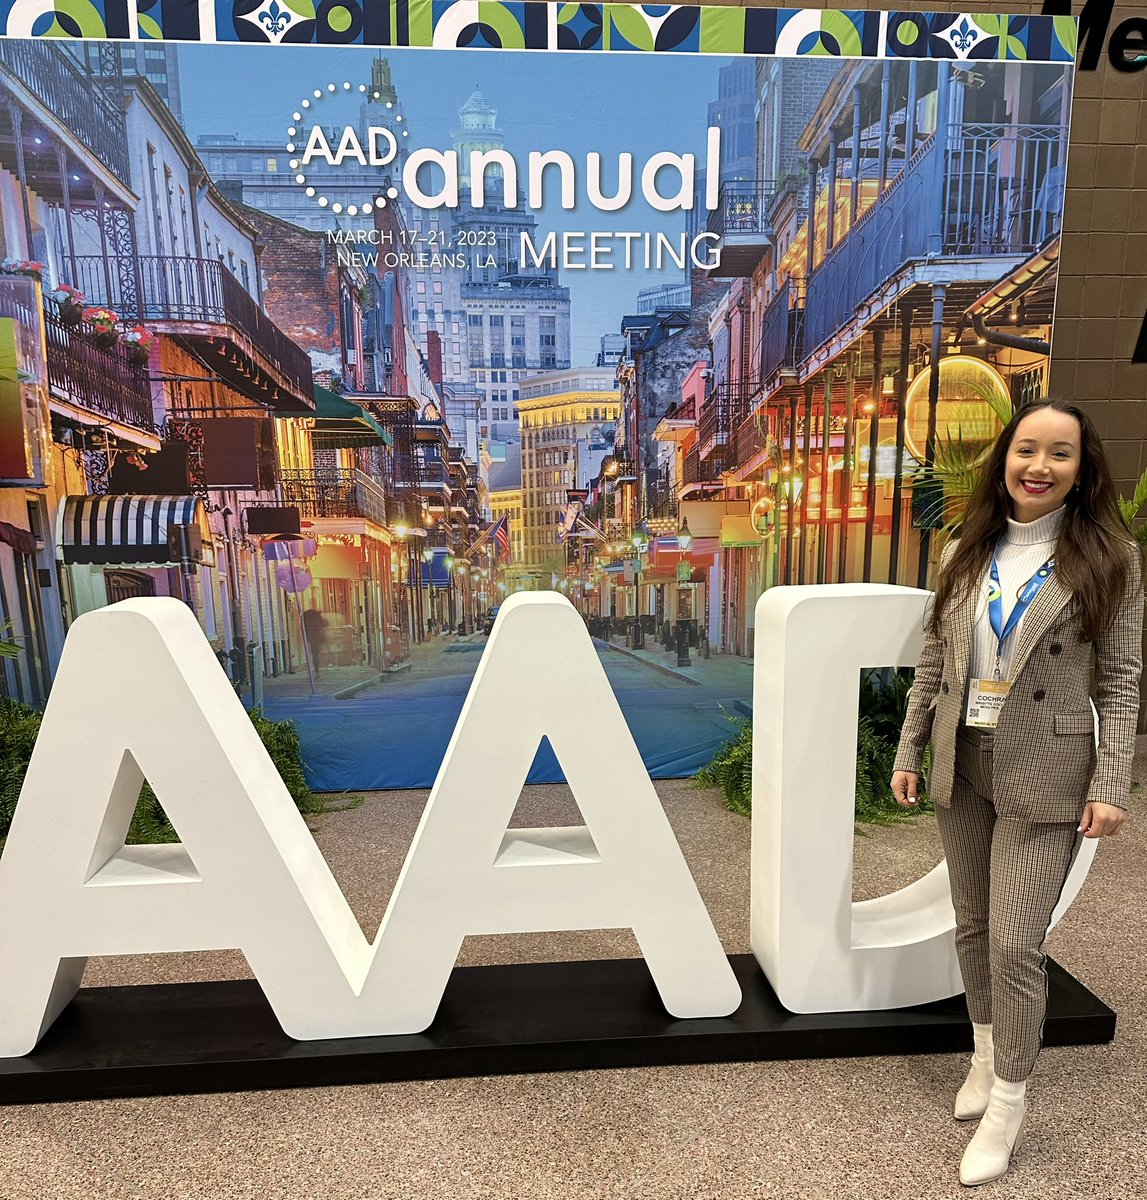 Had such a great weekend at #AAD2023 learning from dermatologists on a wide range of topics such as psoriasis, pruritus, PRP therapy, melanoma, pregnancy medication safety, prurigo nodularis, atopic dermatitis and more! I am so blessed to have attended & can’t wait for #AAD2024